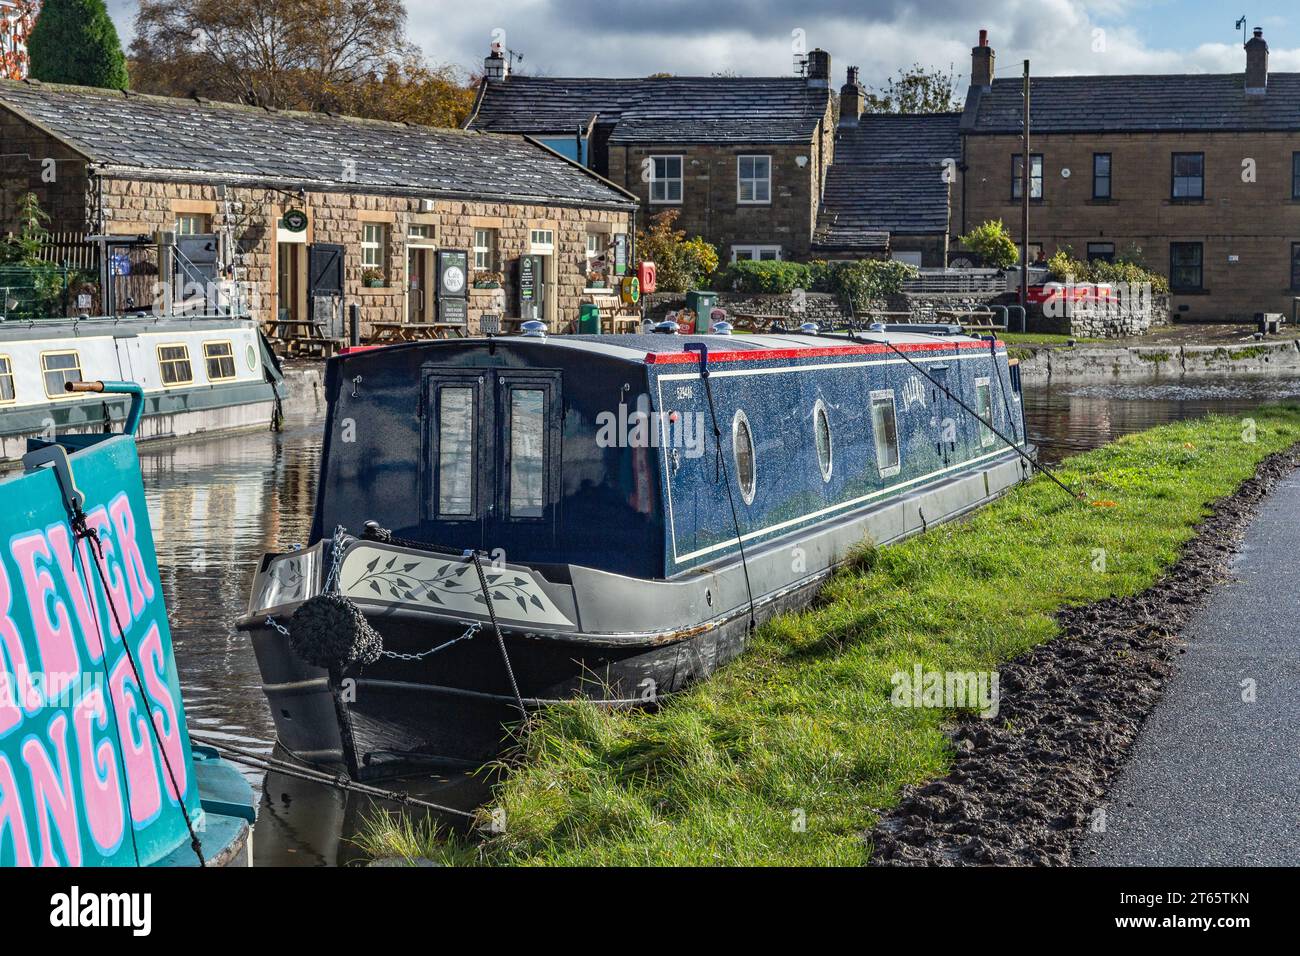 A barge (narrowboat, flat bottomed boat) is moored up on the Leeds Liverpool canal in Bingley, Yorkshire. Five Rise Locks cafe is in the background. Stock Photo